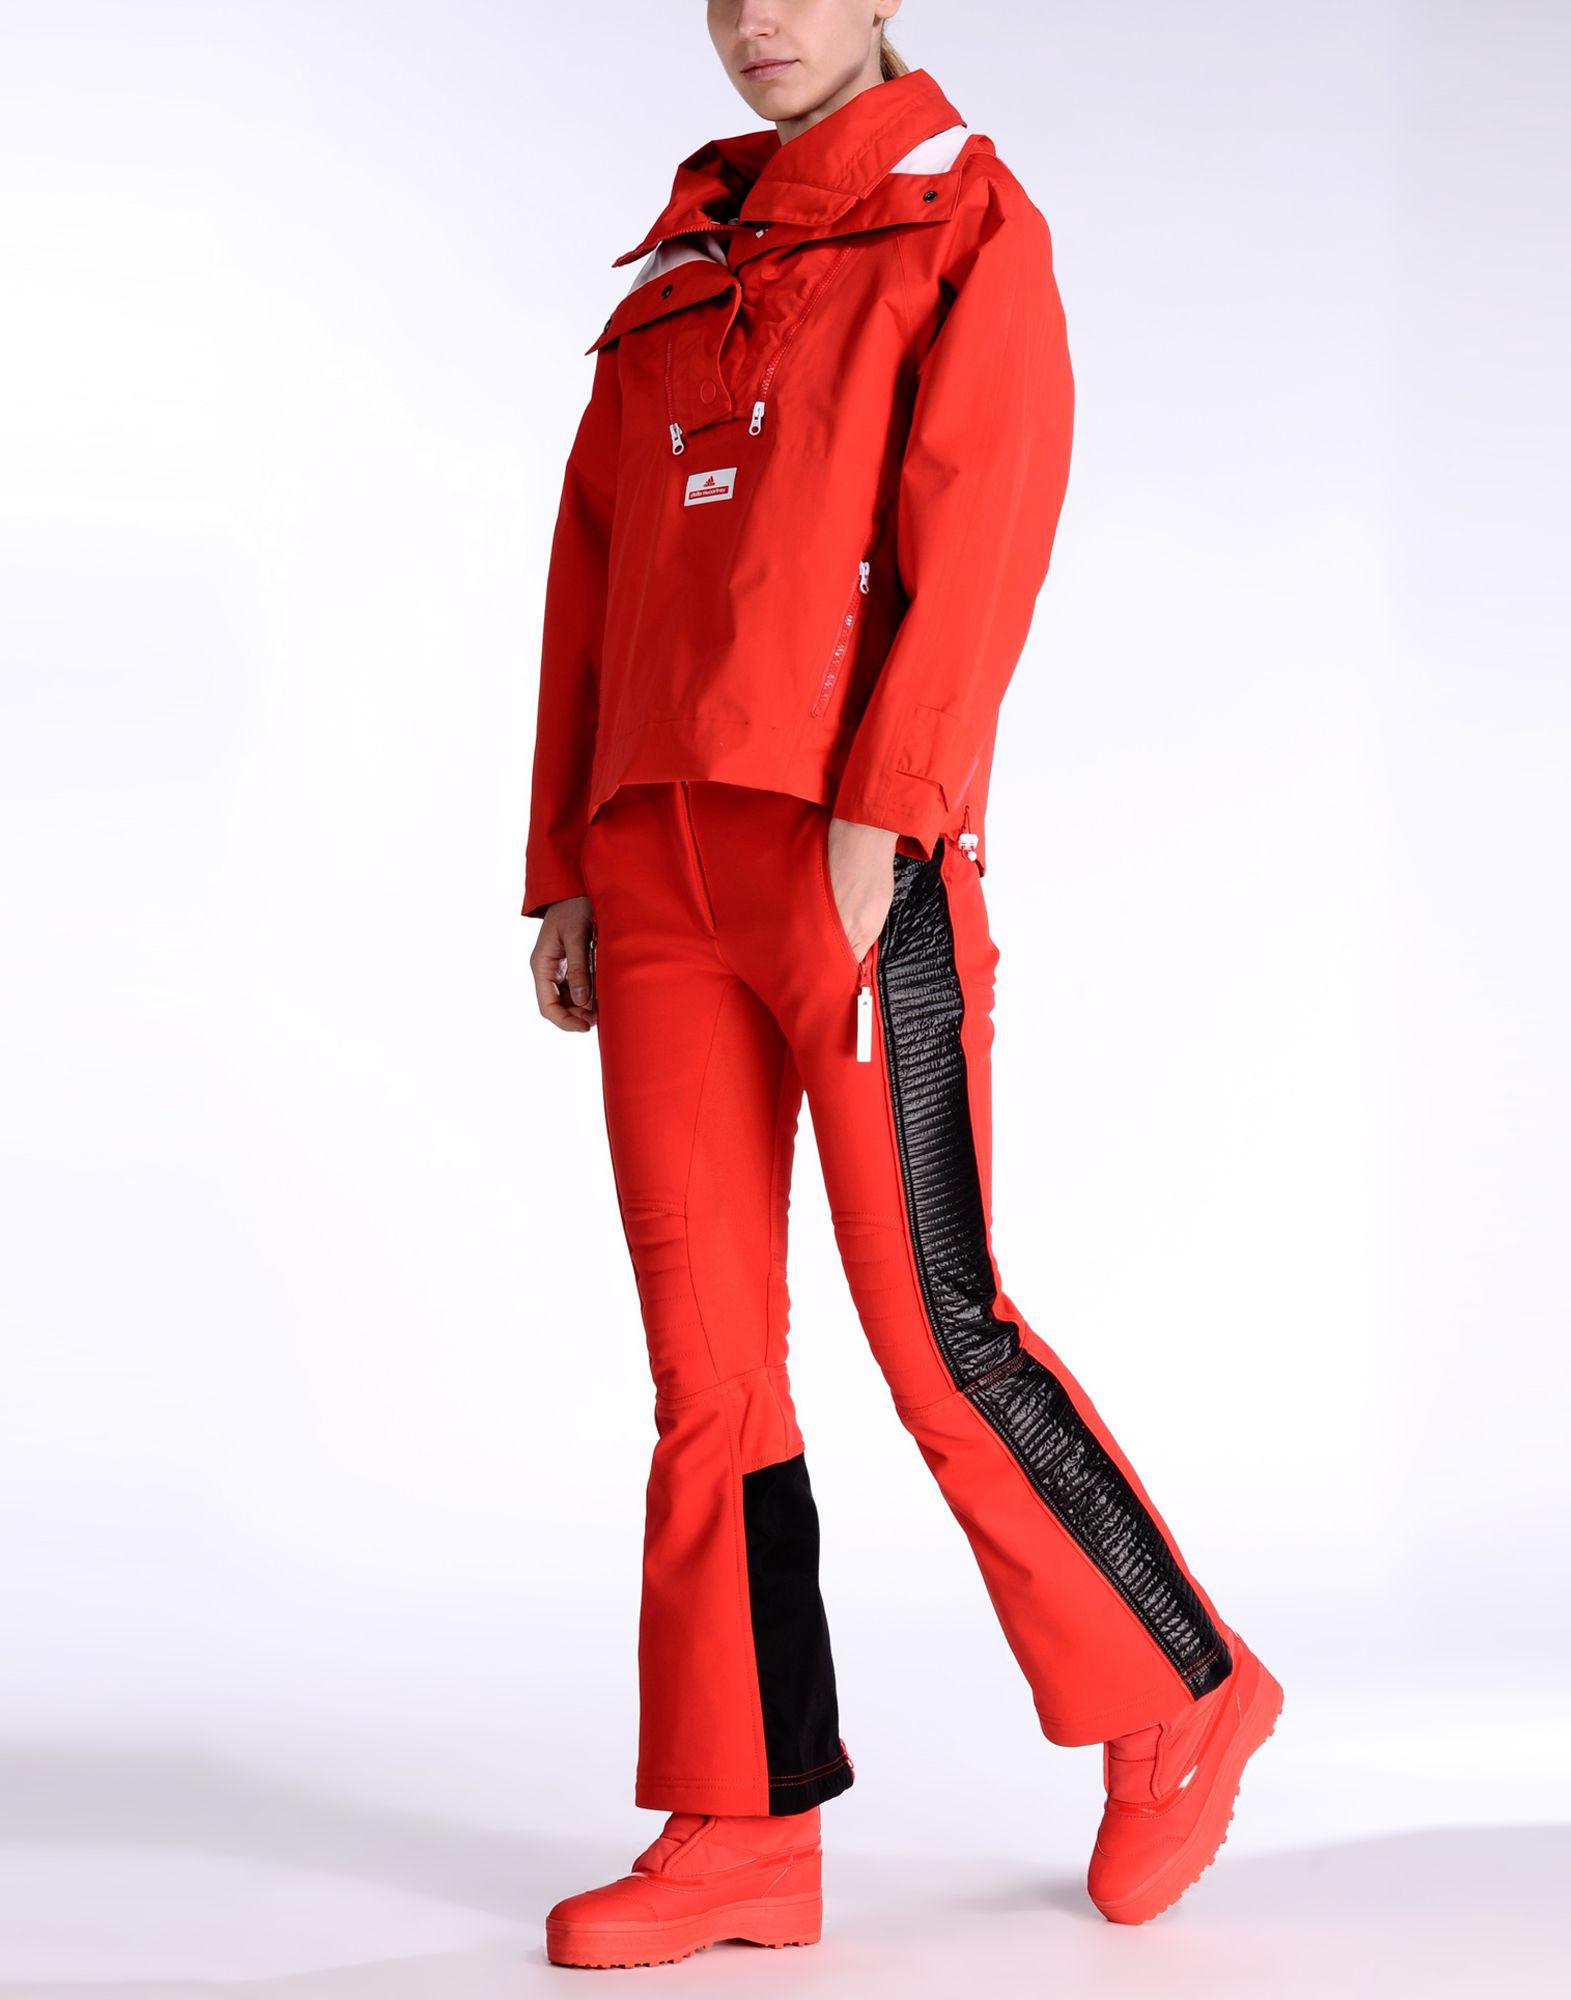 adidas By Stella McCartney Synthetic Ski Pants in Red (Black) - Lyst